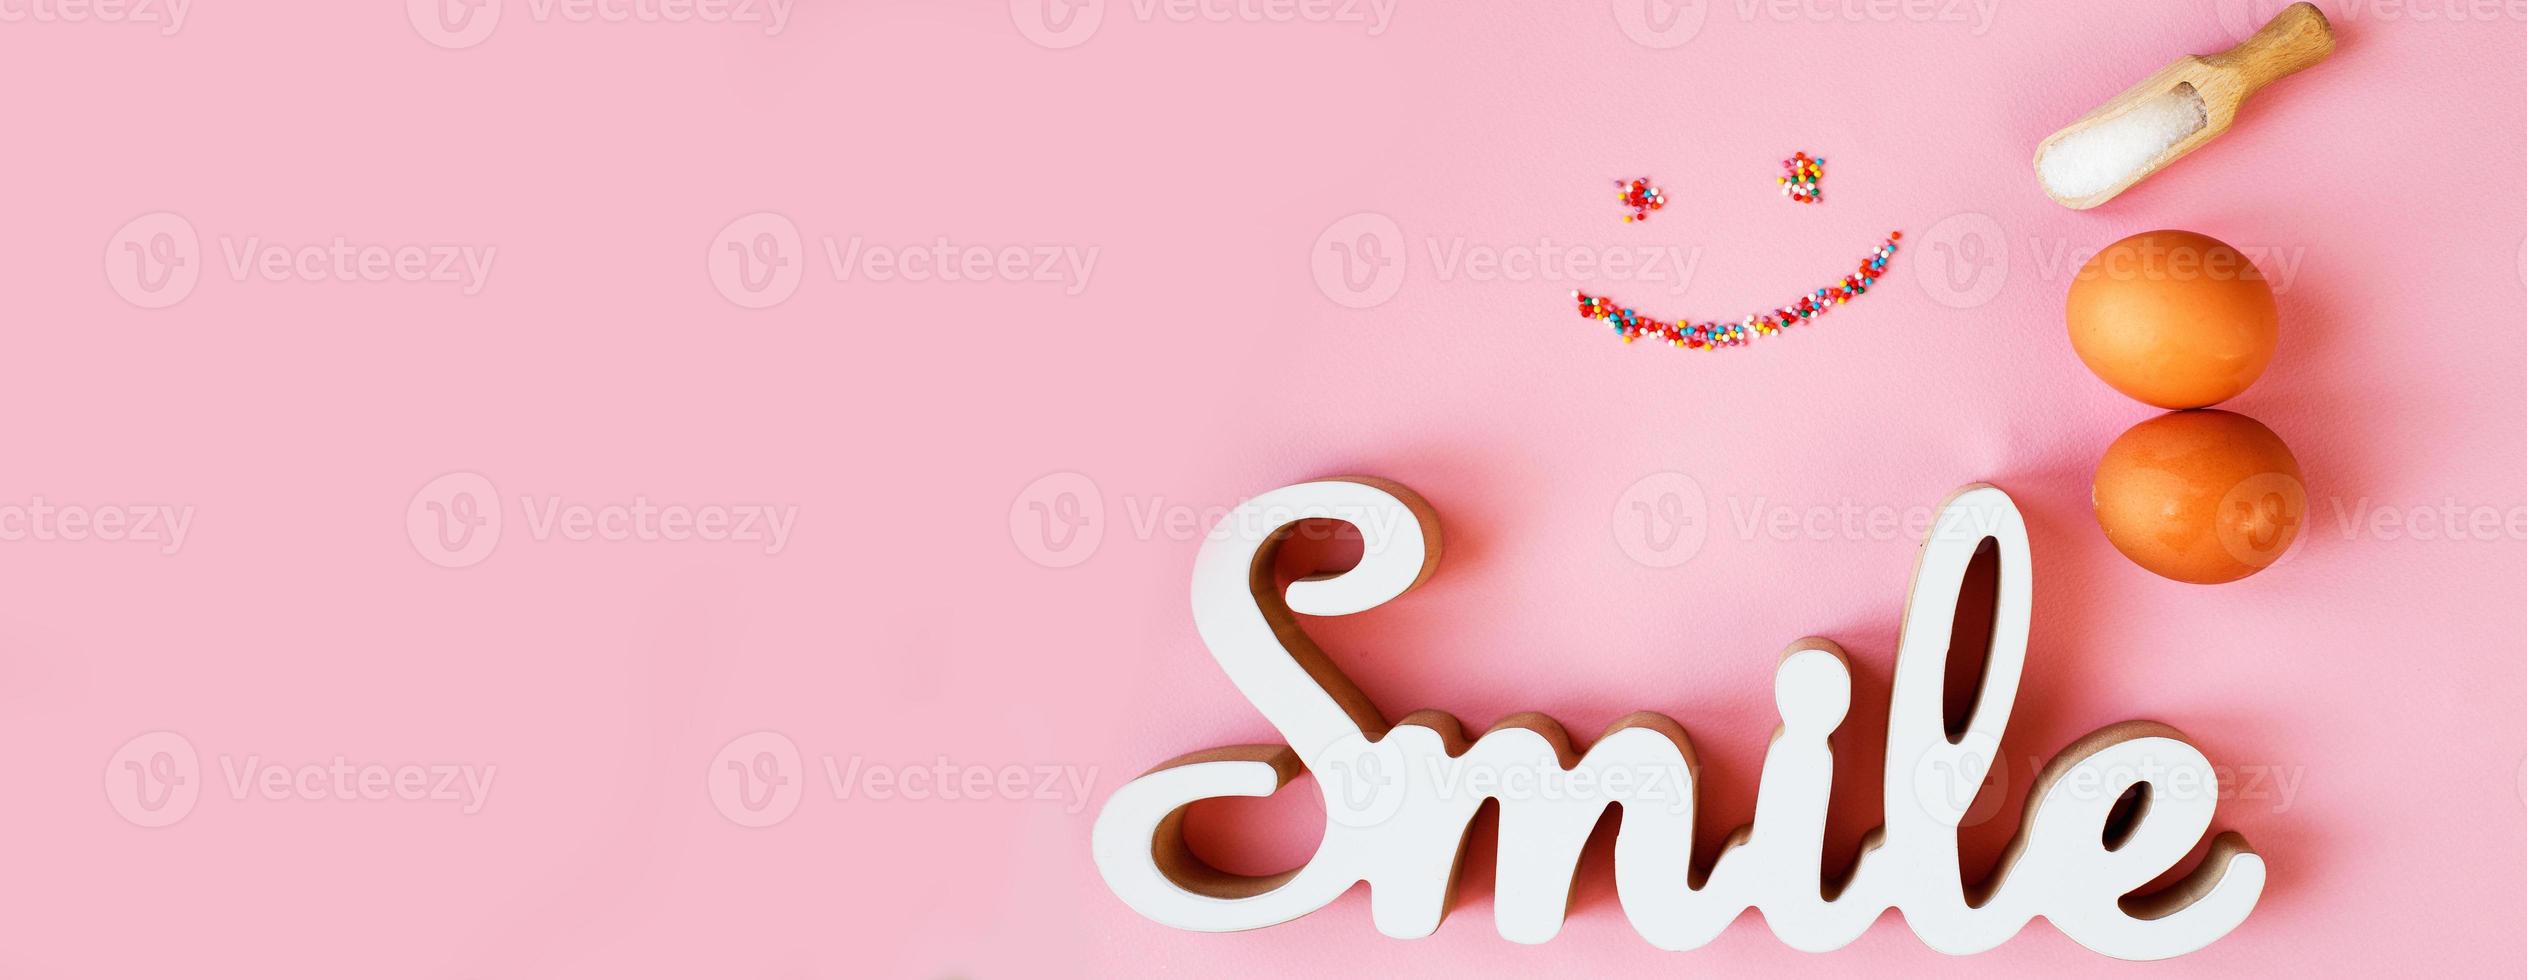 Ingredients for cooking baking - egg, sugar culinary topping on pink background. Concept of cooking dessert. banner photo